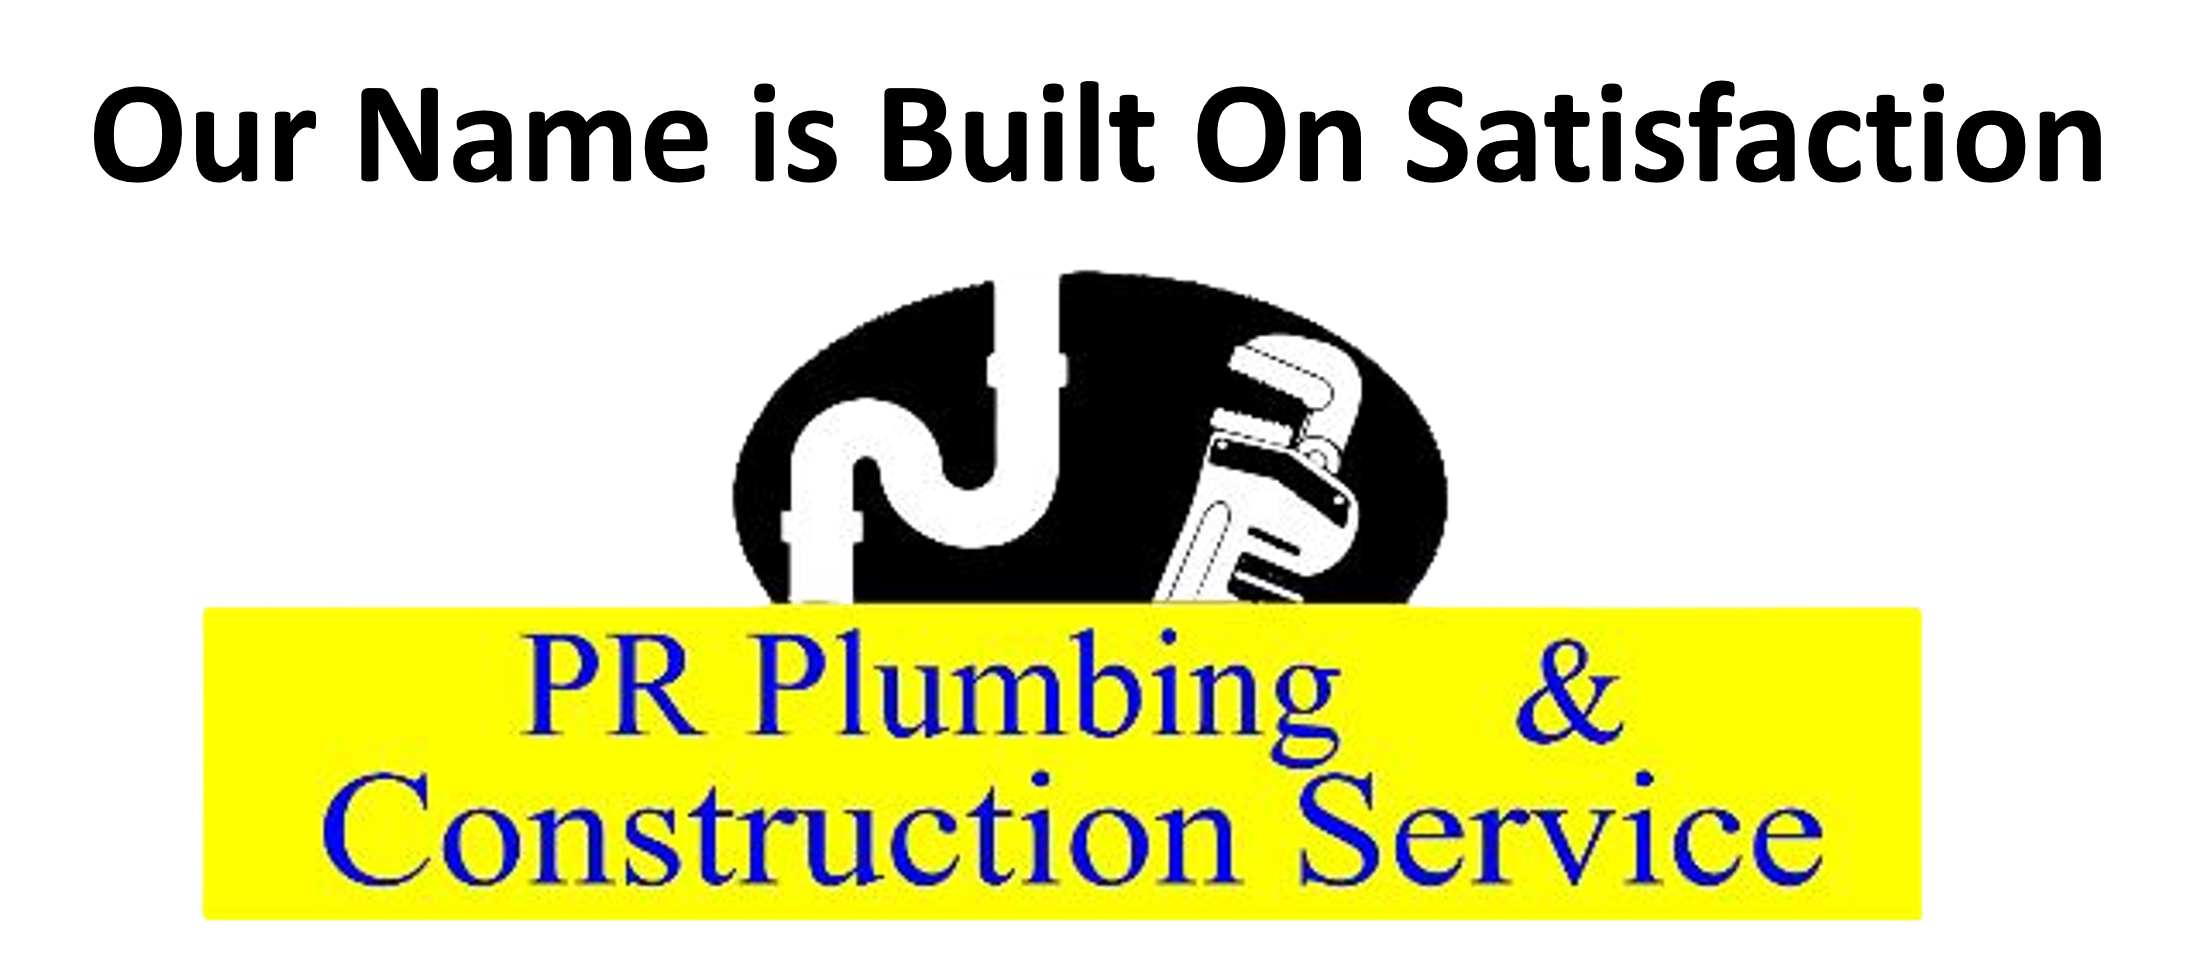 PR Plumbing and Construction Service in Kingston Jamaica